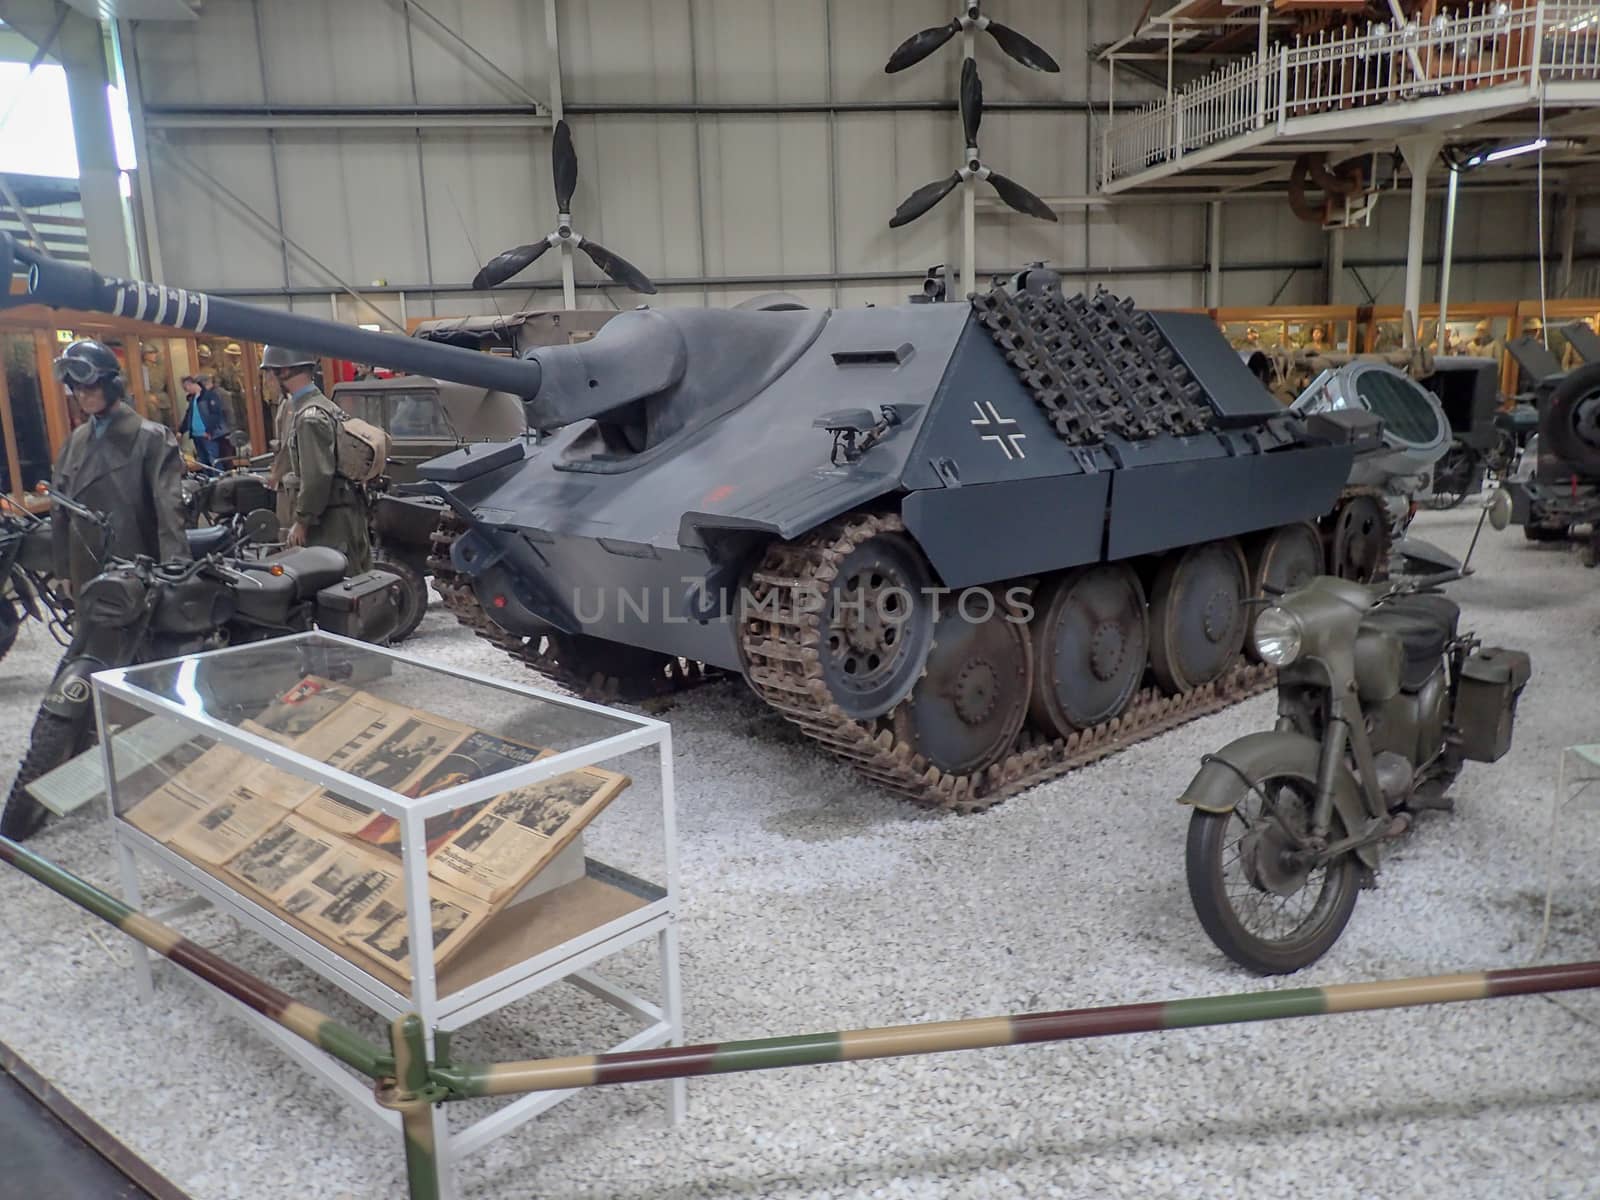 a german tank from the world war in a museum by Tevion25